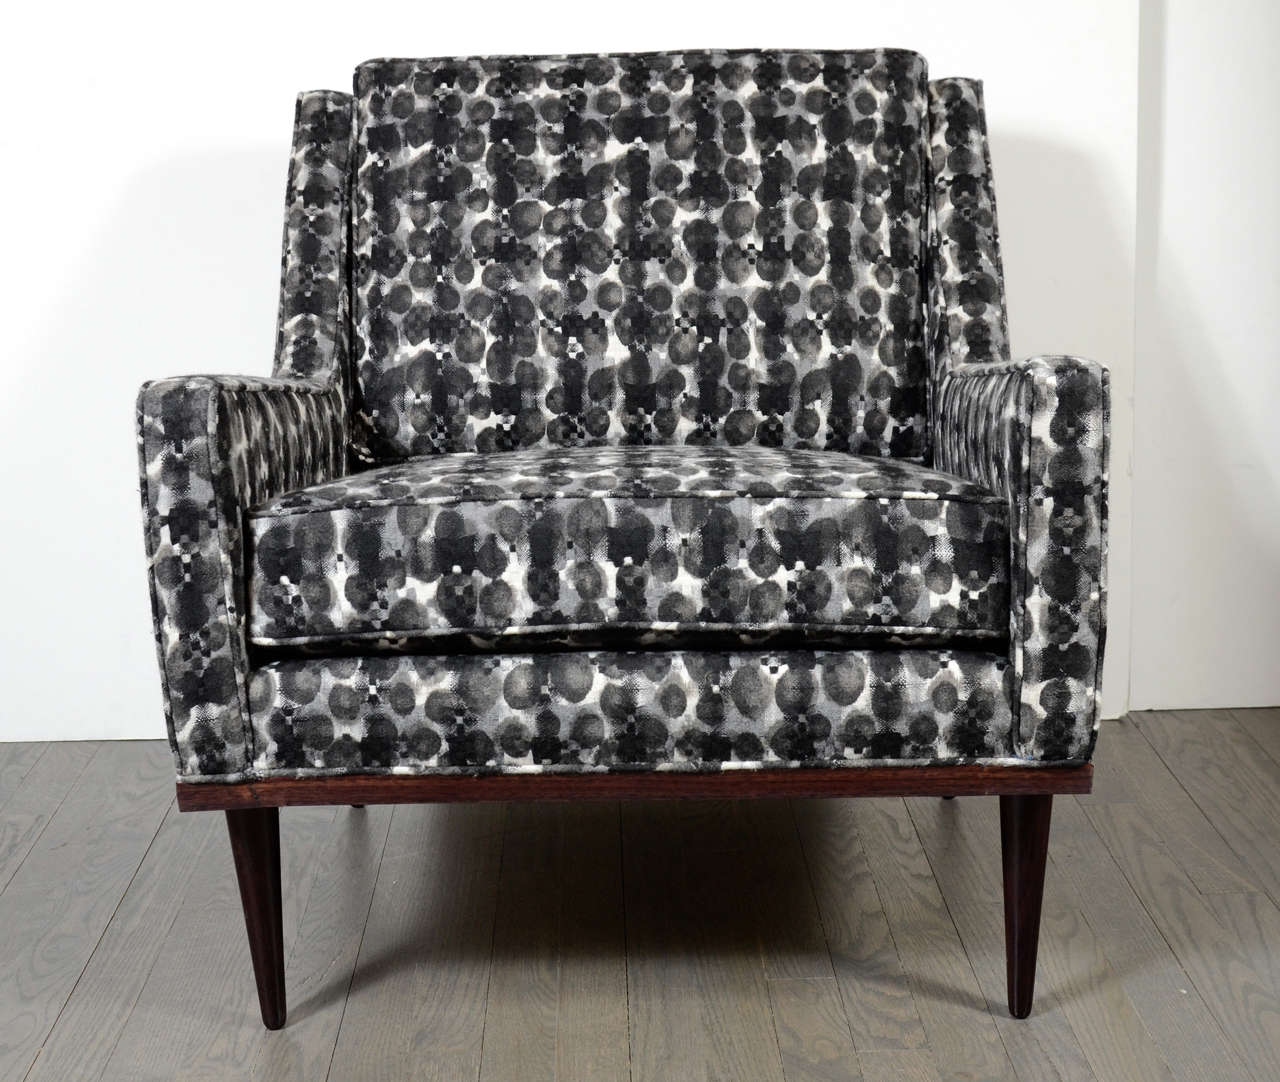 This chic Mid-Century armchair by Dunbar features a slender low arm, splayed conical legs in walnut  and walnut trim and has been newly upholstered in a very sophisticated black and white mottled  fabric.